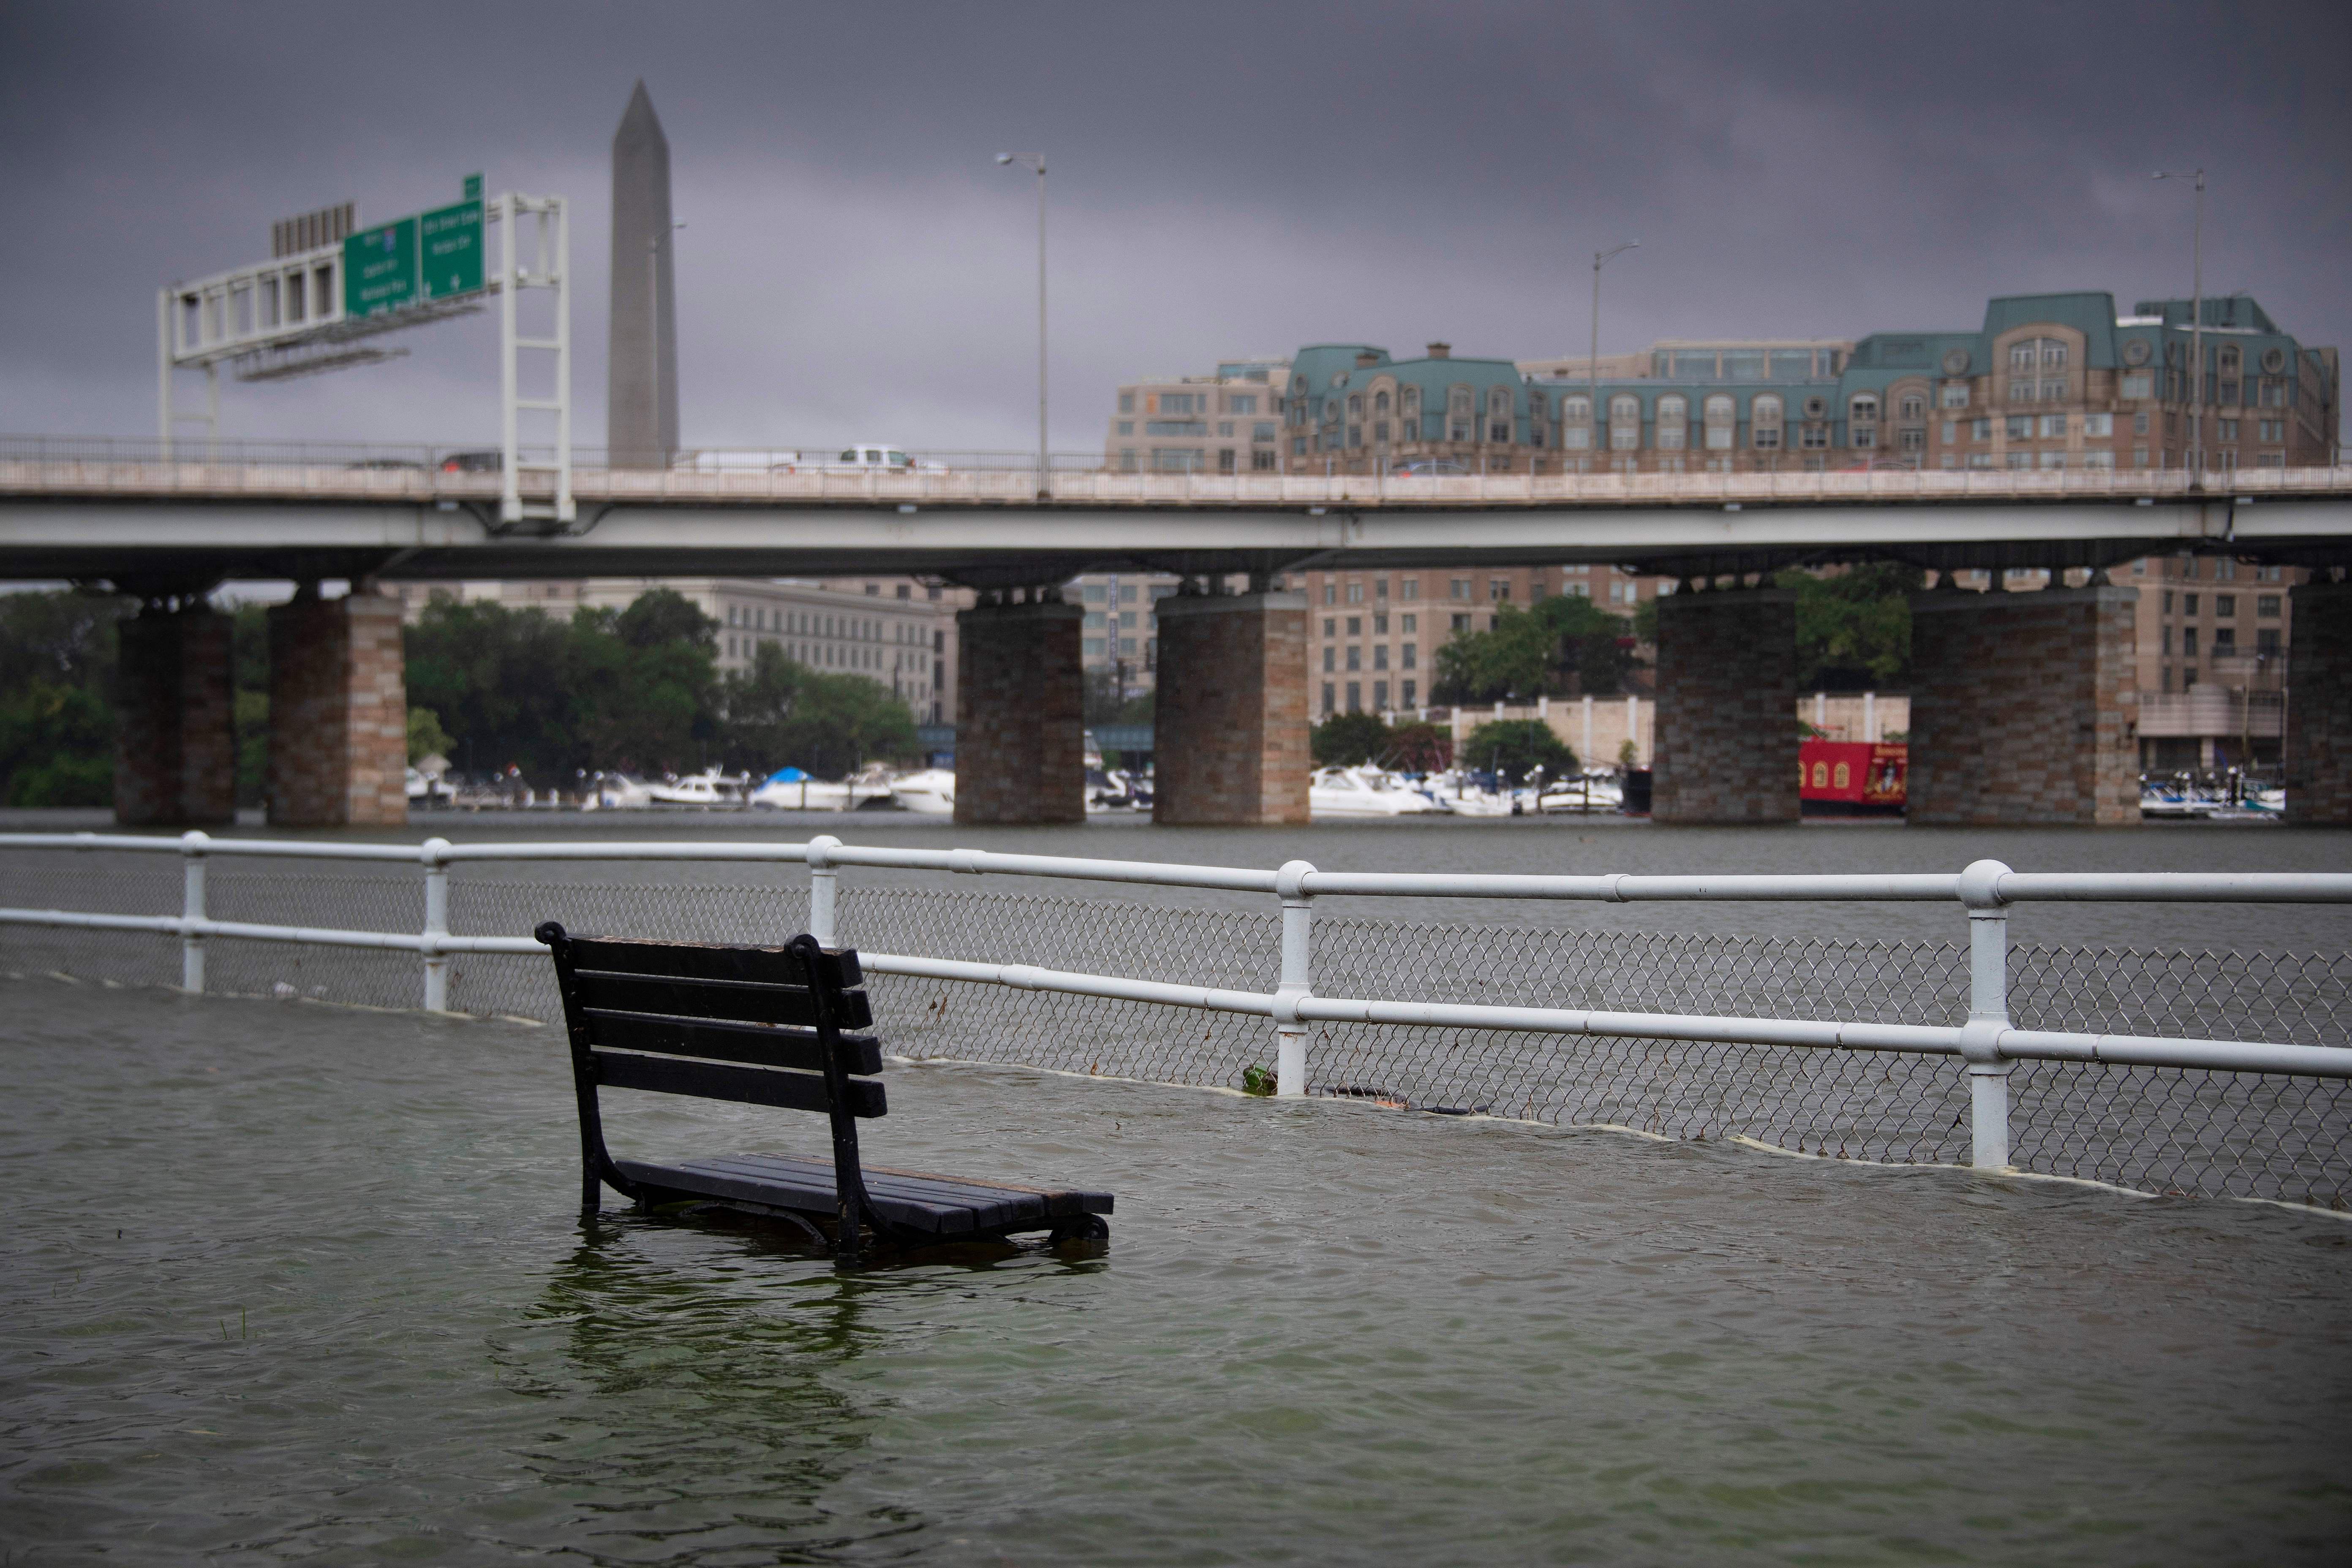 Waters nearly cover a park bench along the river near a bridge in Washington